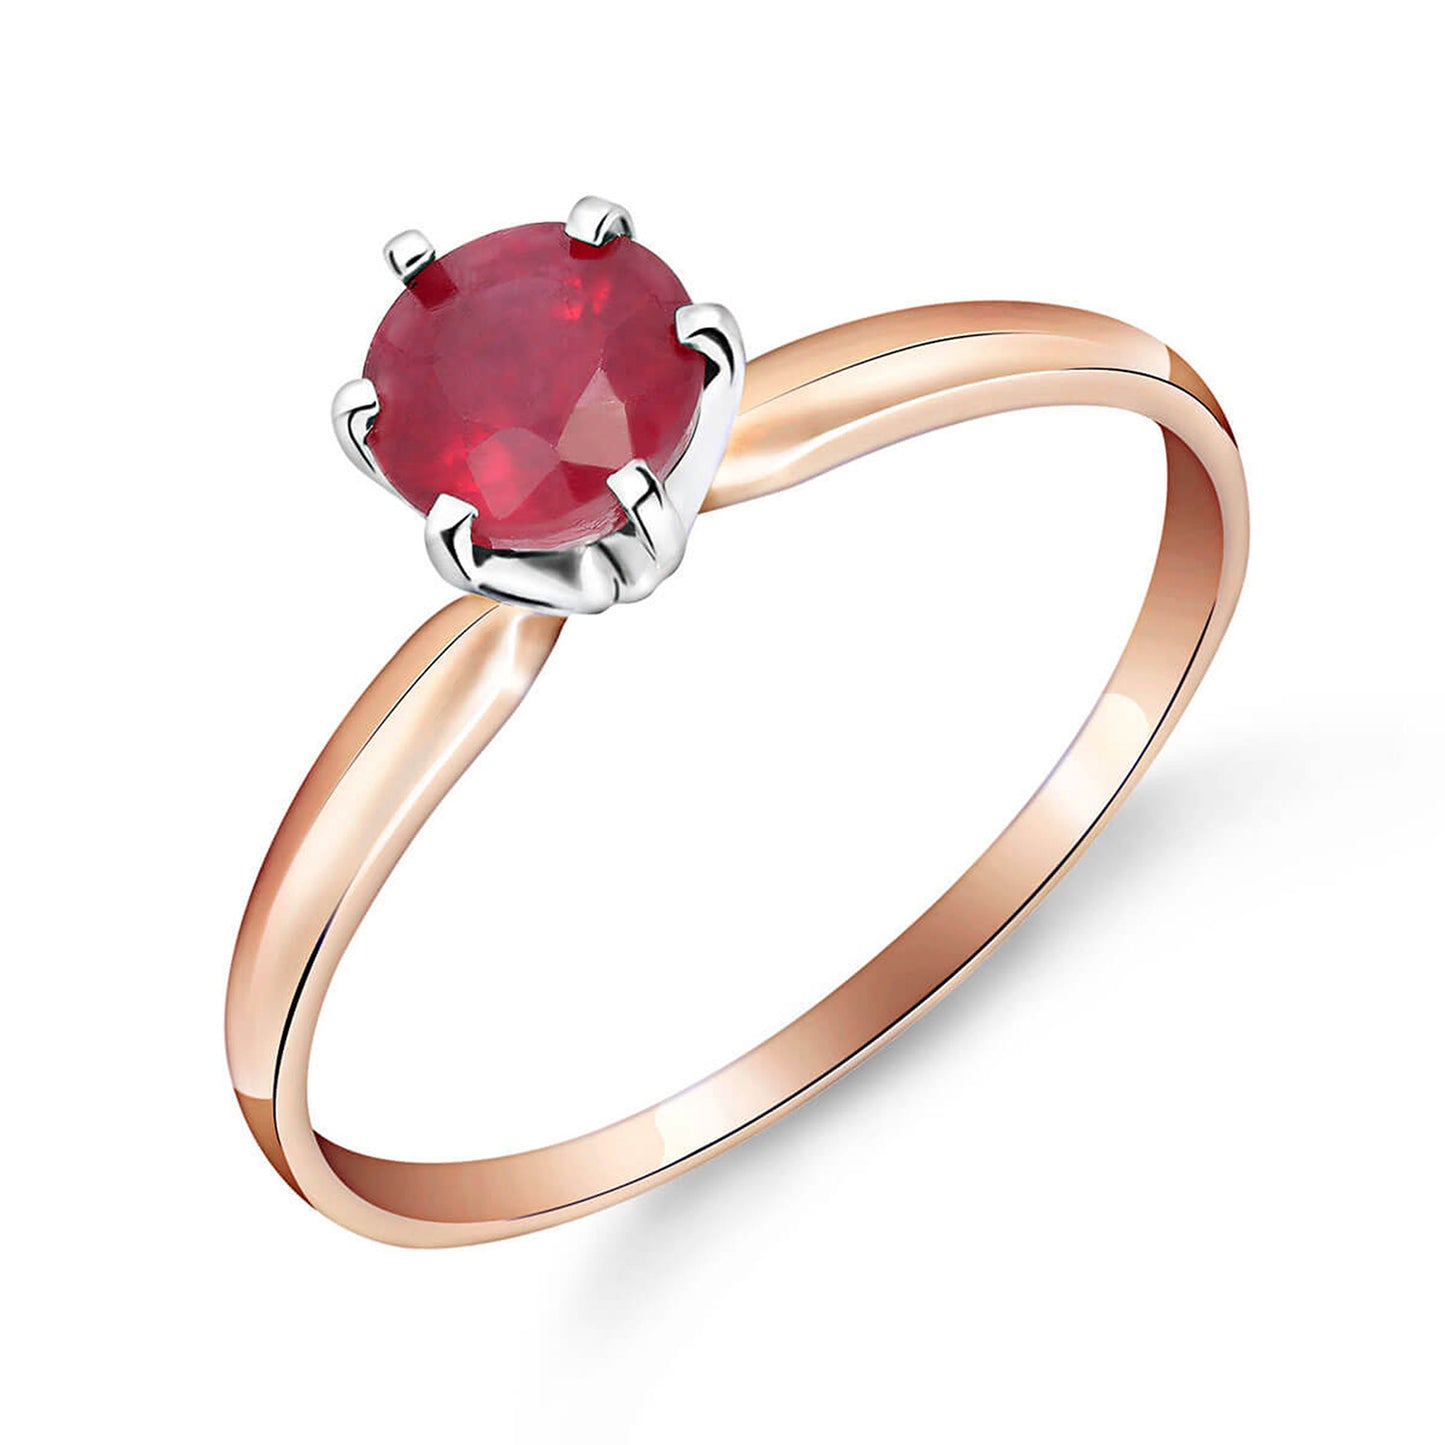 0.65 Carat 14K Solid Gold Solitaire Ring Natural Ruby